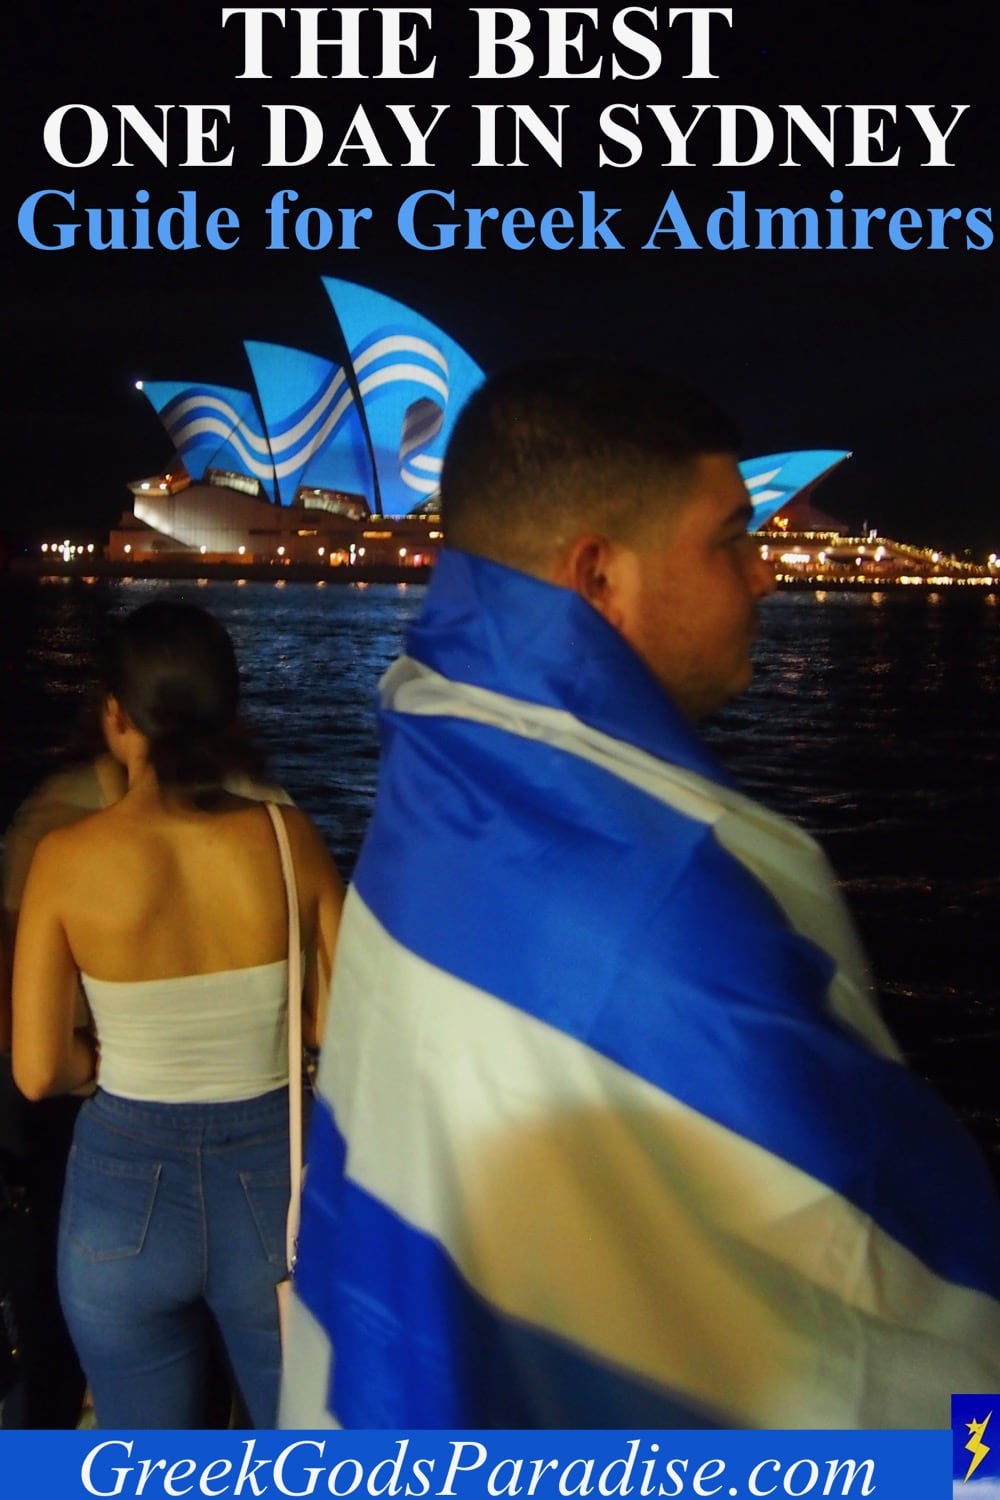 The Best One Day in Sydney Guide for Greek Admirers